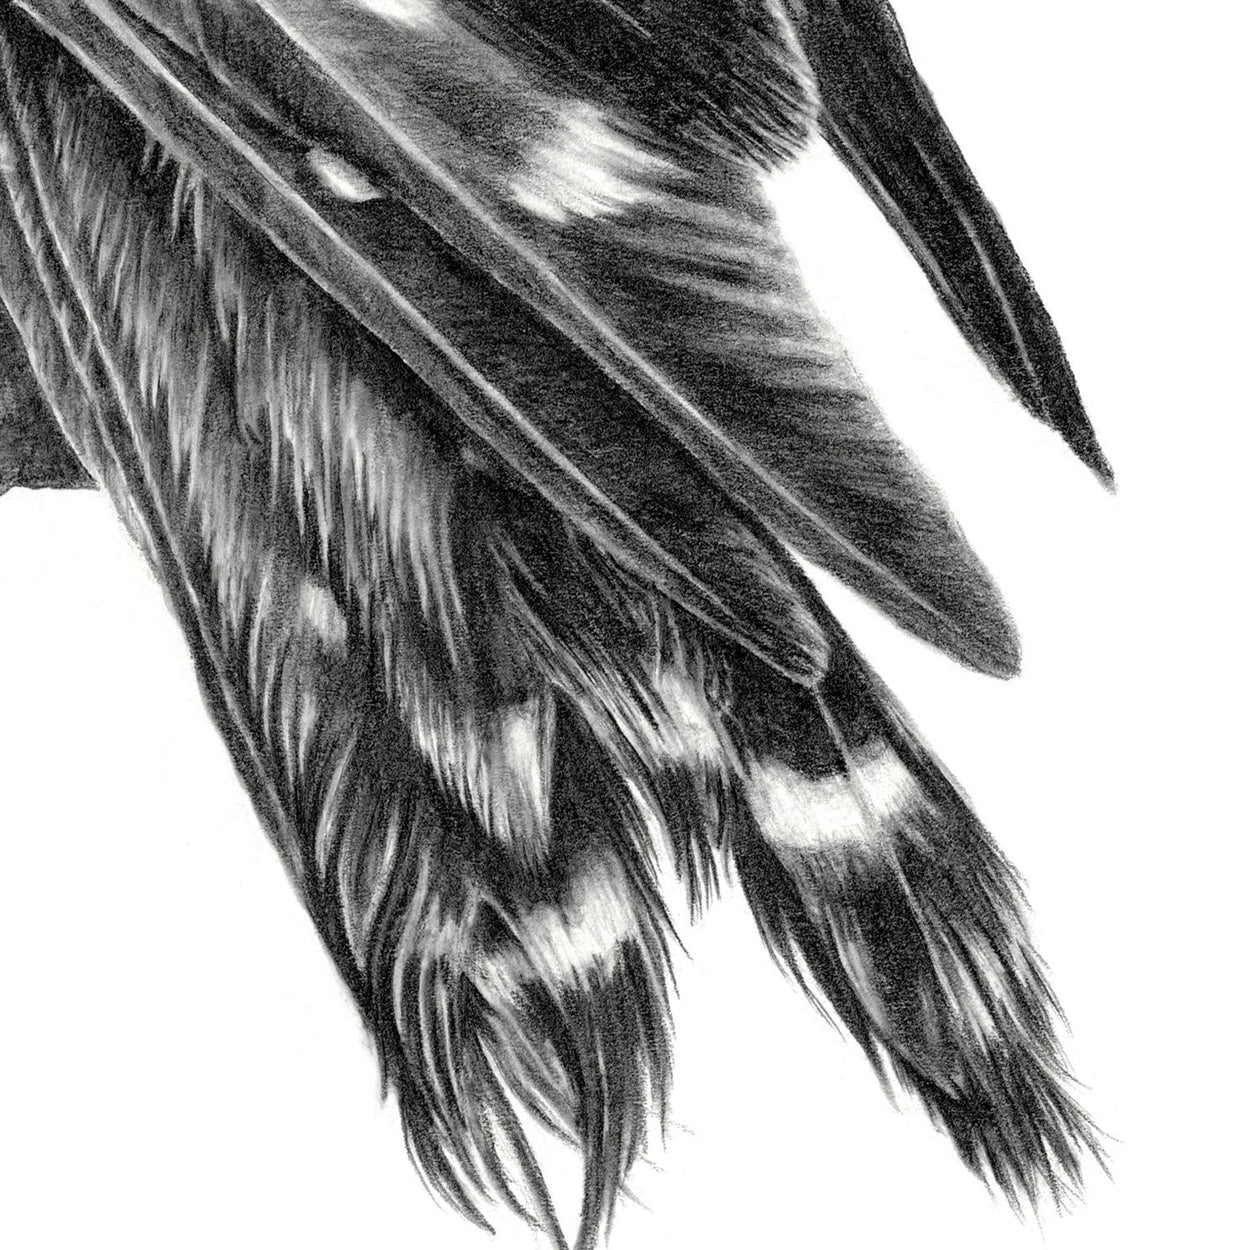 Merlin Tail Drawing Close-up - The Thriving Wild